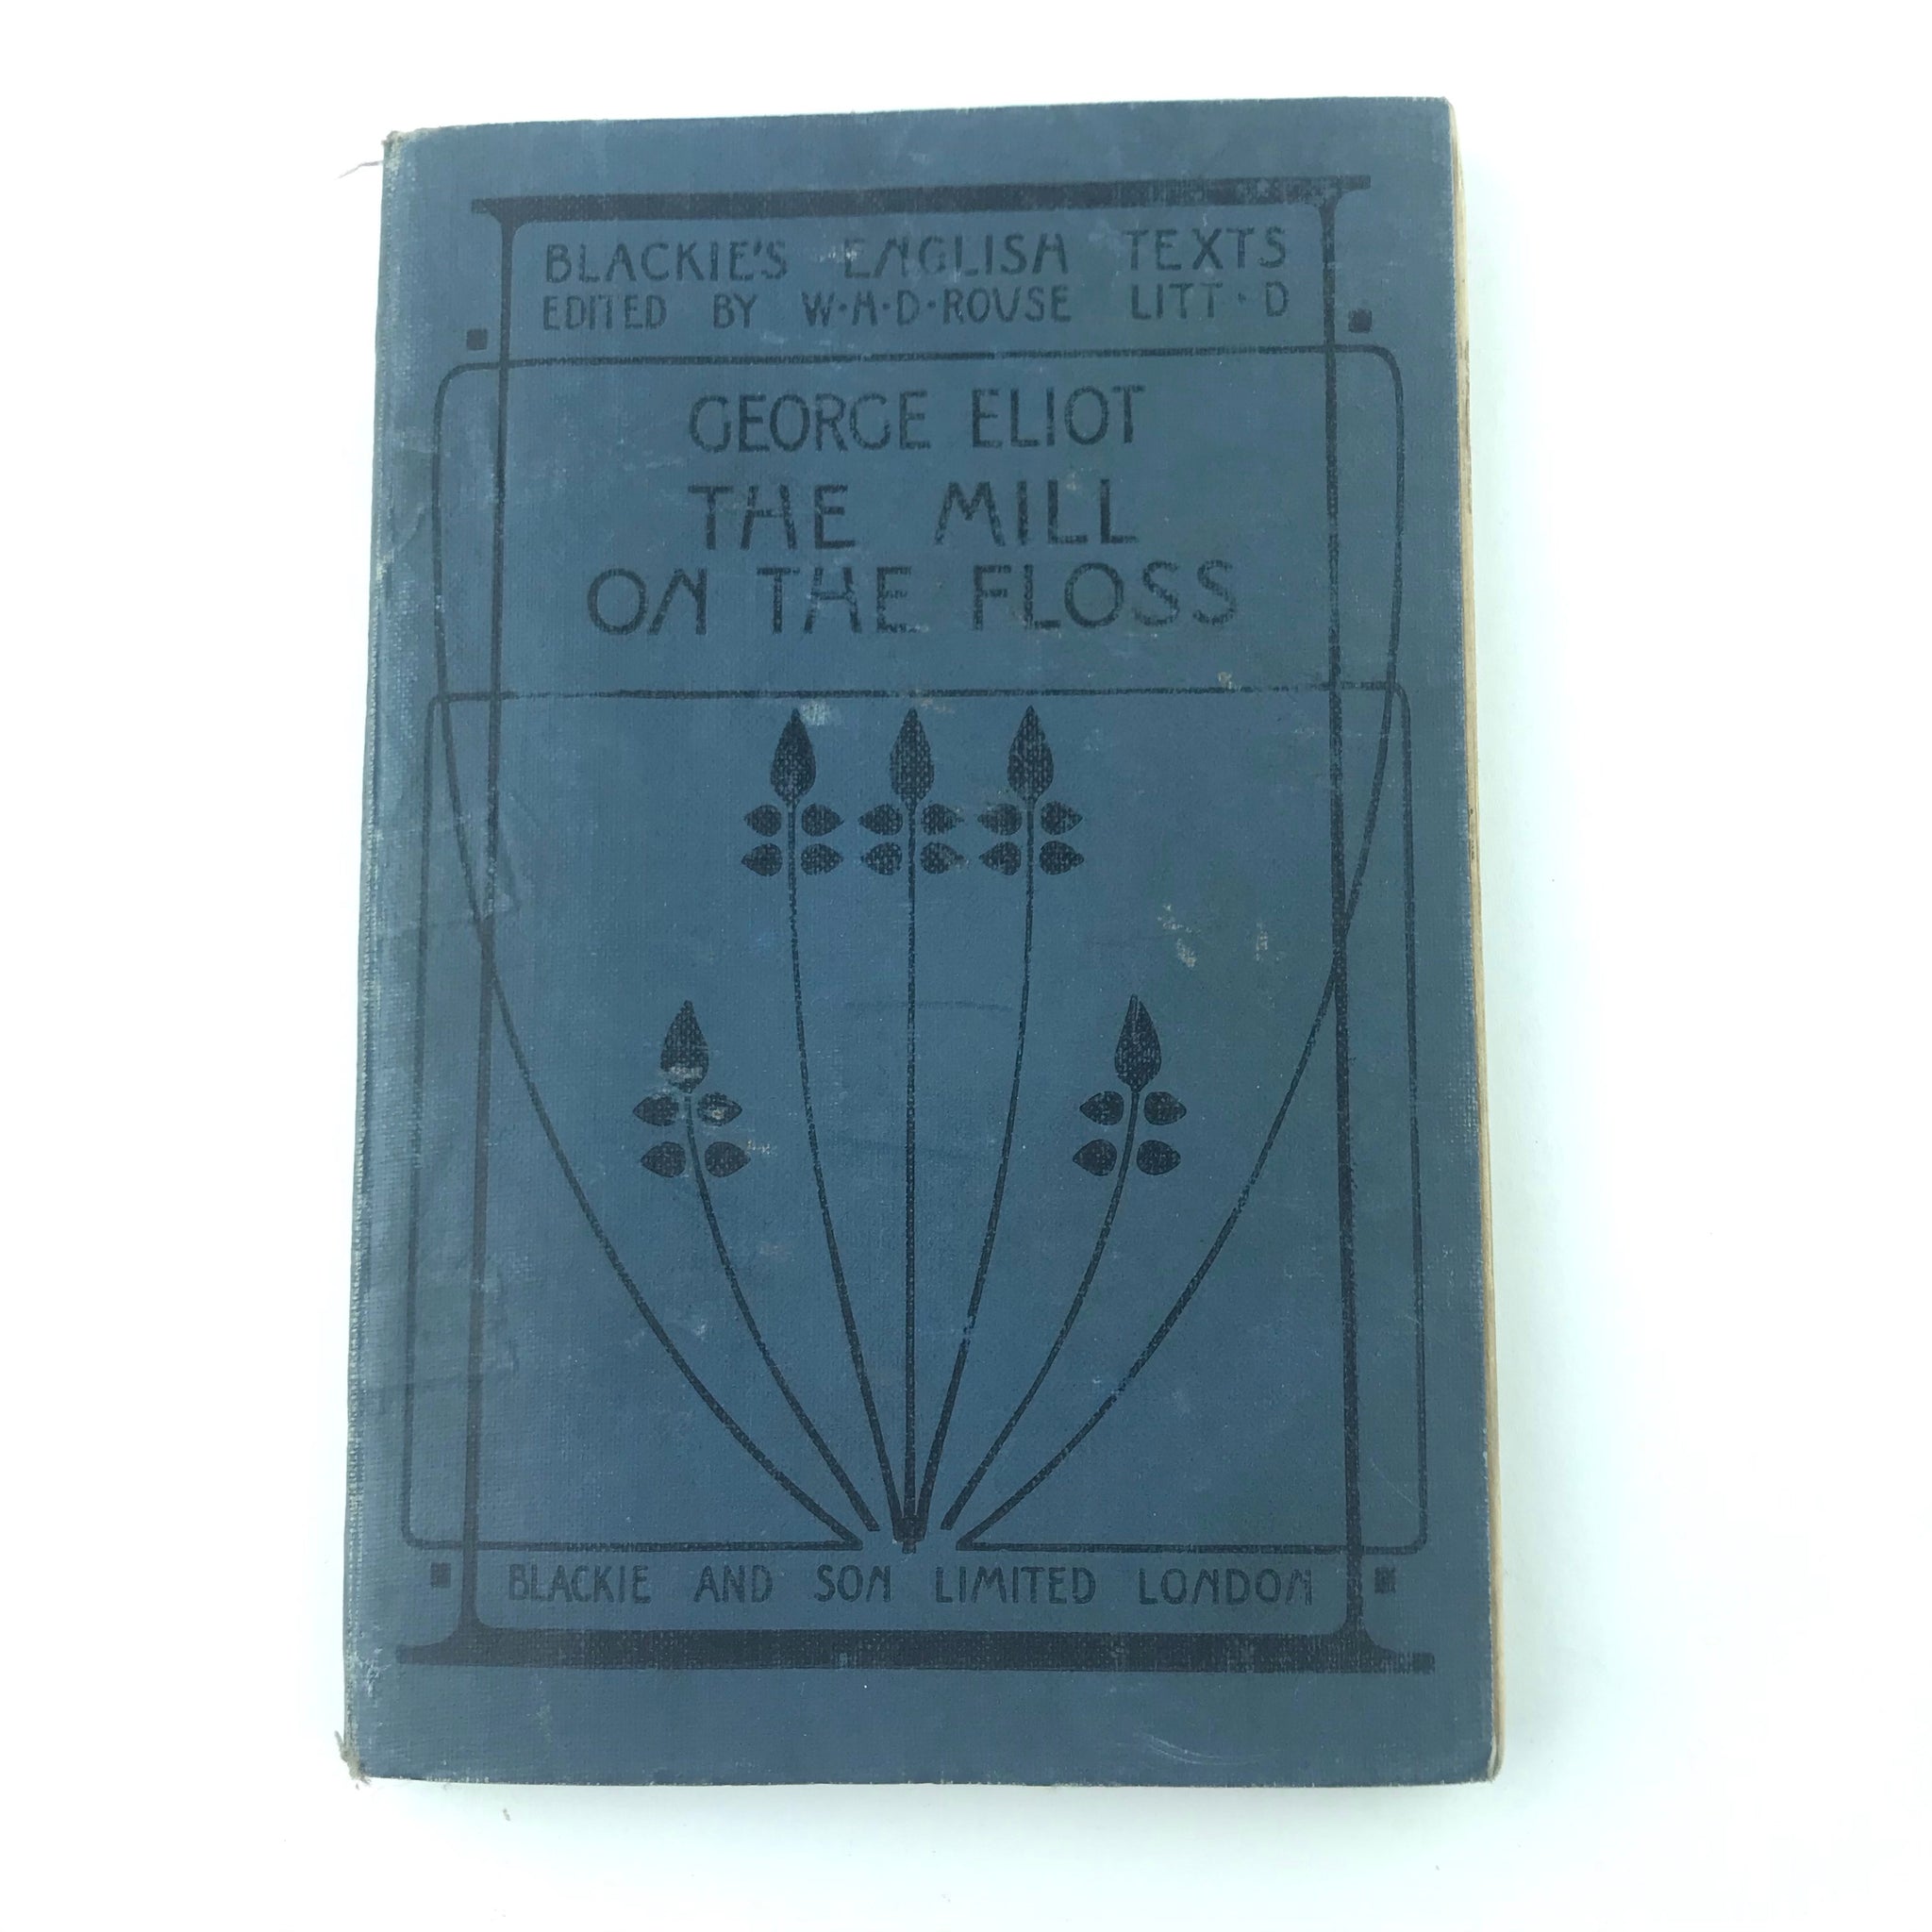 Blackies English Texts - The Mill On The Floss by George Eliot - London 1900s